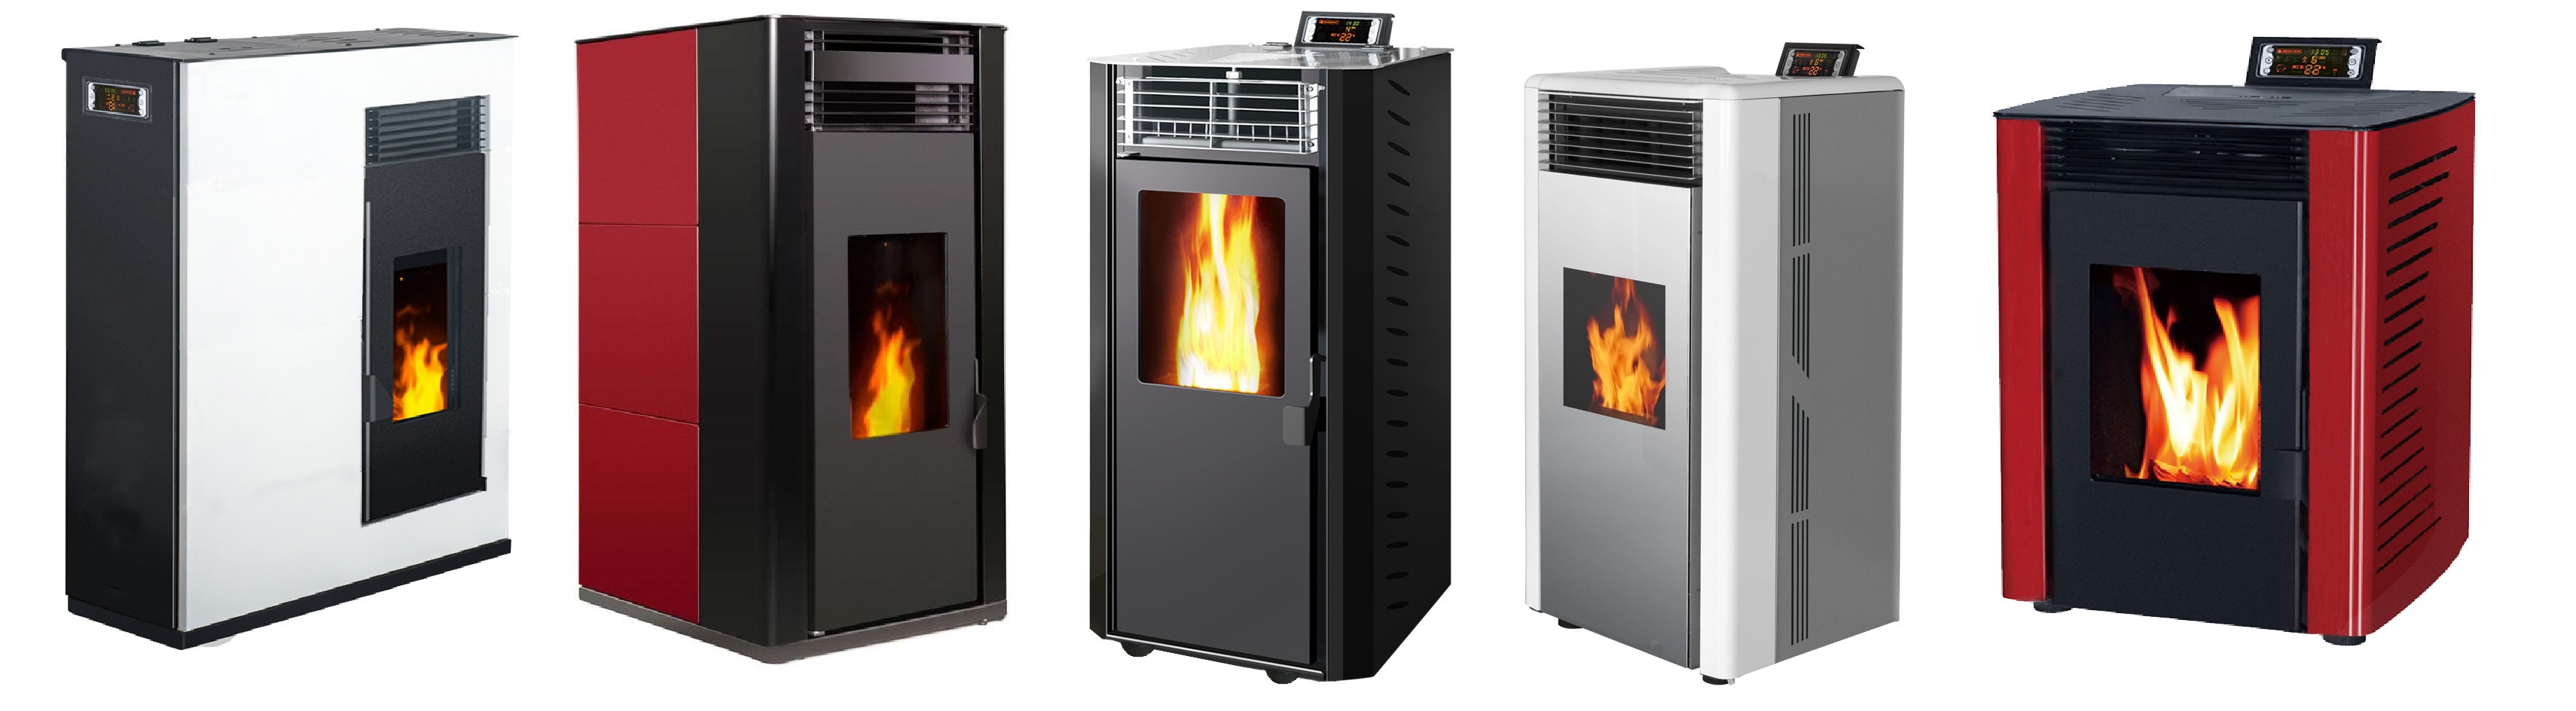 “Quality Pellet Heaters at Affordable Prices”